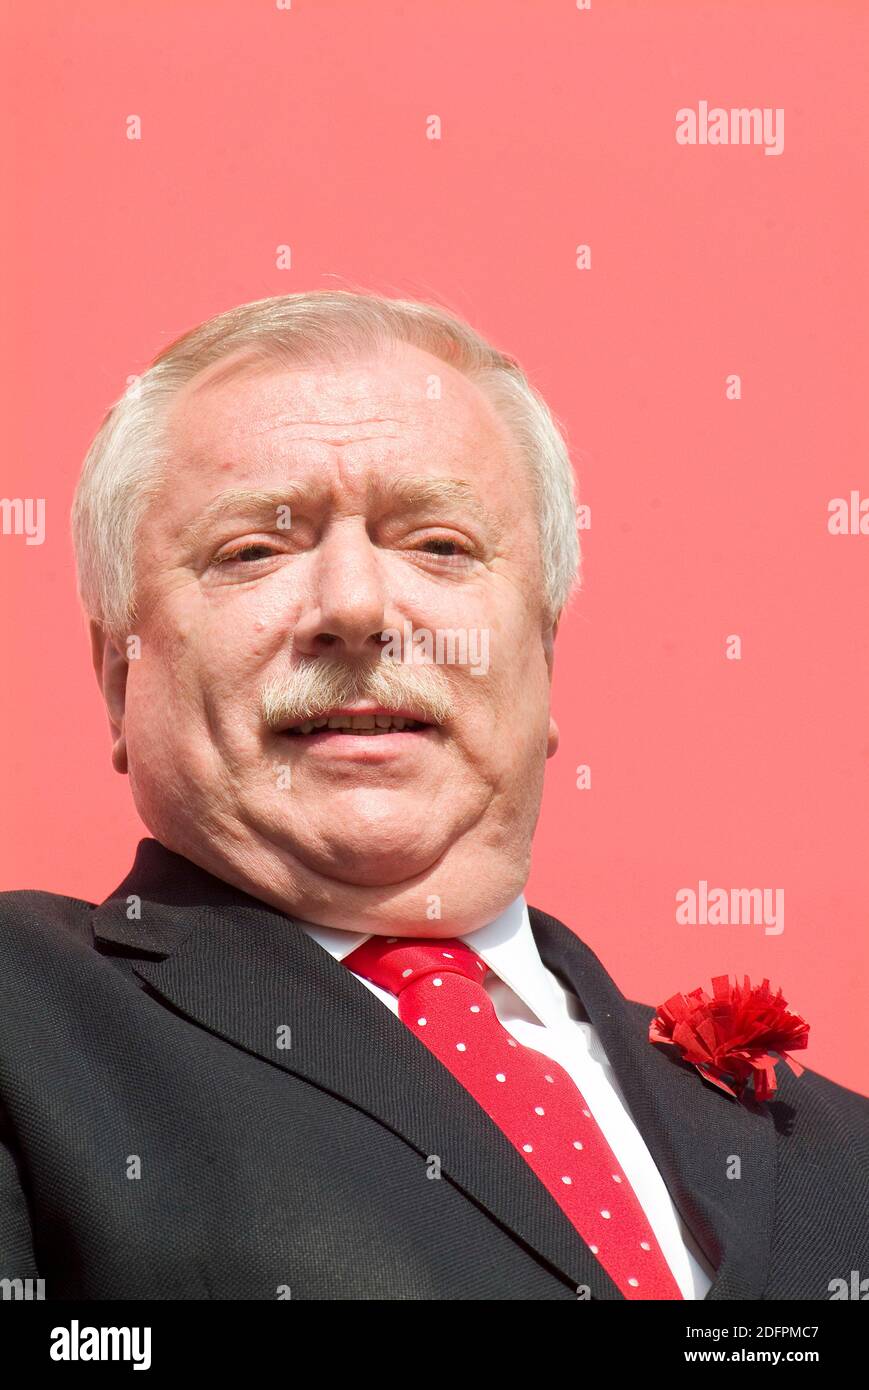 Austria Vienna. April 30, 2007. Michael Häupl is an Austrian politician (SPÖ- Social Democratic Party of Austria) and was Mayor and Governor of Vienna from November 7, 1994 to May 24, 2018. Stock Photo